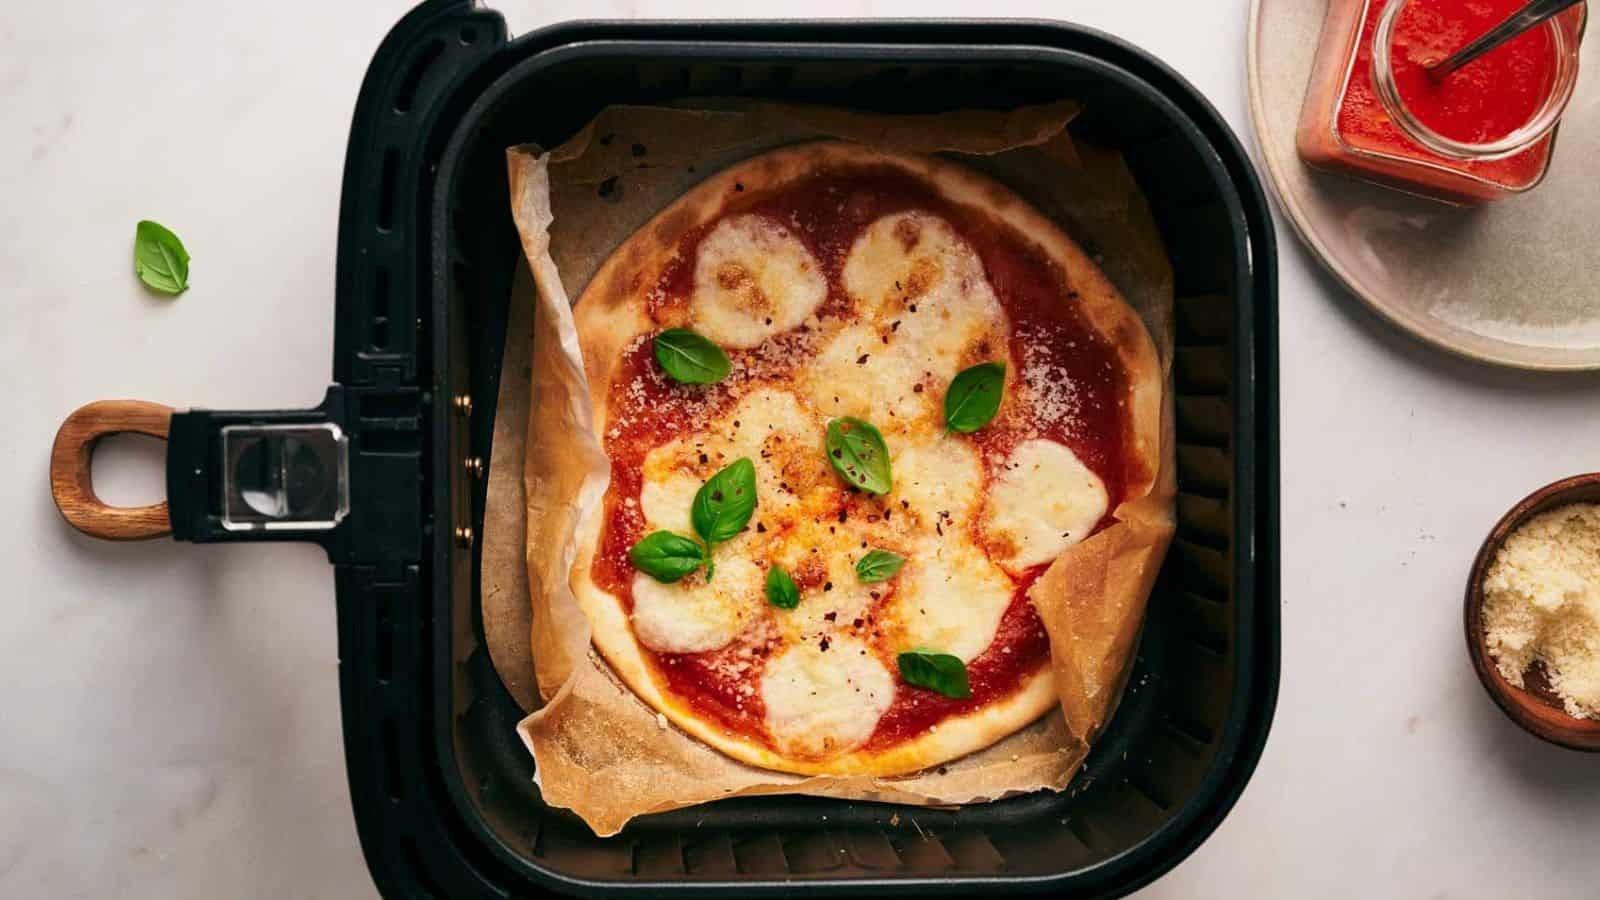 <p>Craving pizza? Our Air Fryer Pizza is your quick fix. Skip the delivery wait and enjoy a crispy crust and perfectly melted cheese right at home. With minimal effort, you’ll have a tasty pizza that rivals your favorite pizzeria, all thanks to the magic of the air fryer.<br><strong>Get the Recipe: </strong><a href="https://www.splashoftaste.com/air-fryer-pizza/?utm_source=msn&utm_medium=page&utm_campaign=msn">Air Fryer Pizza</a></p>